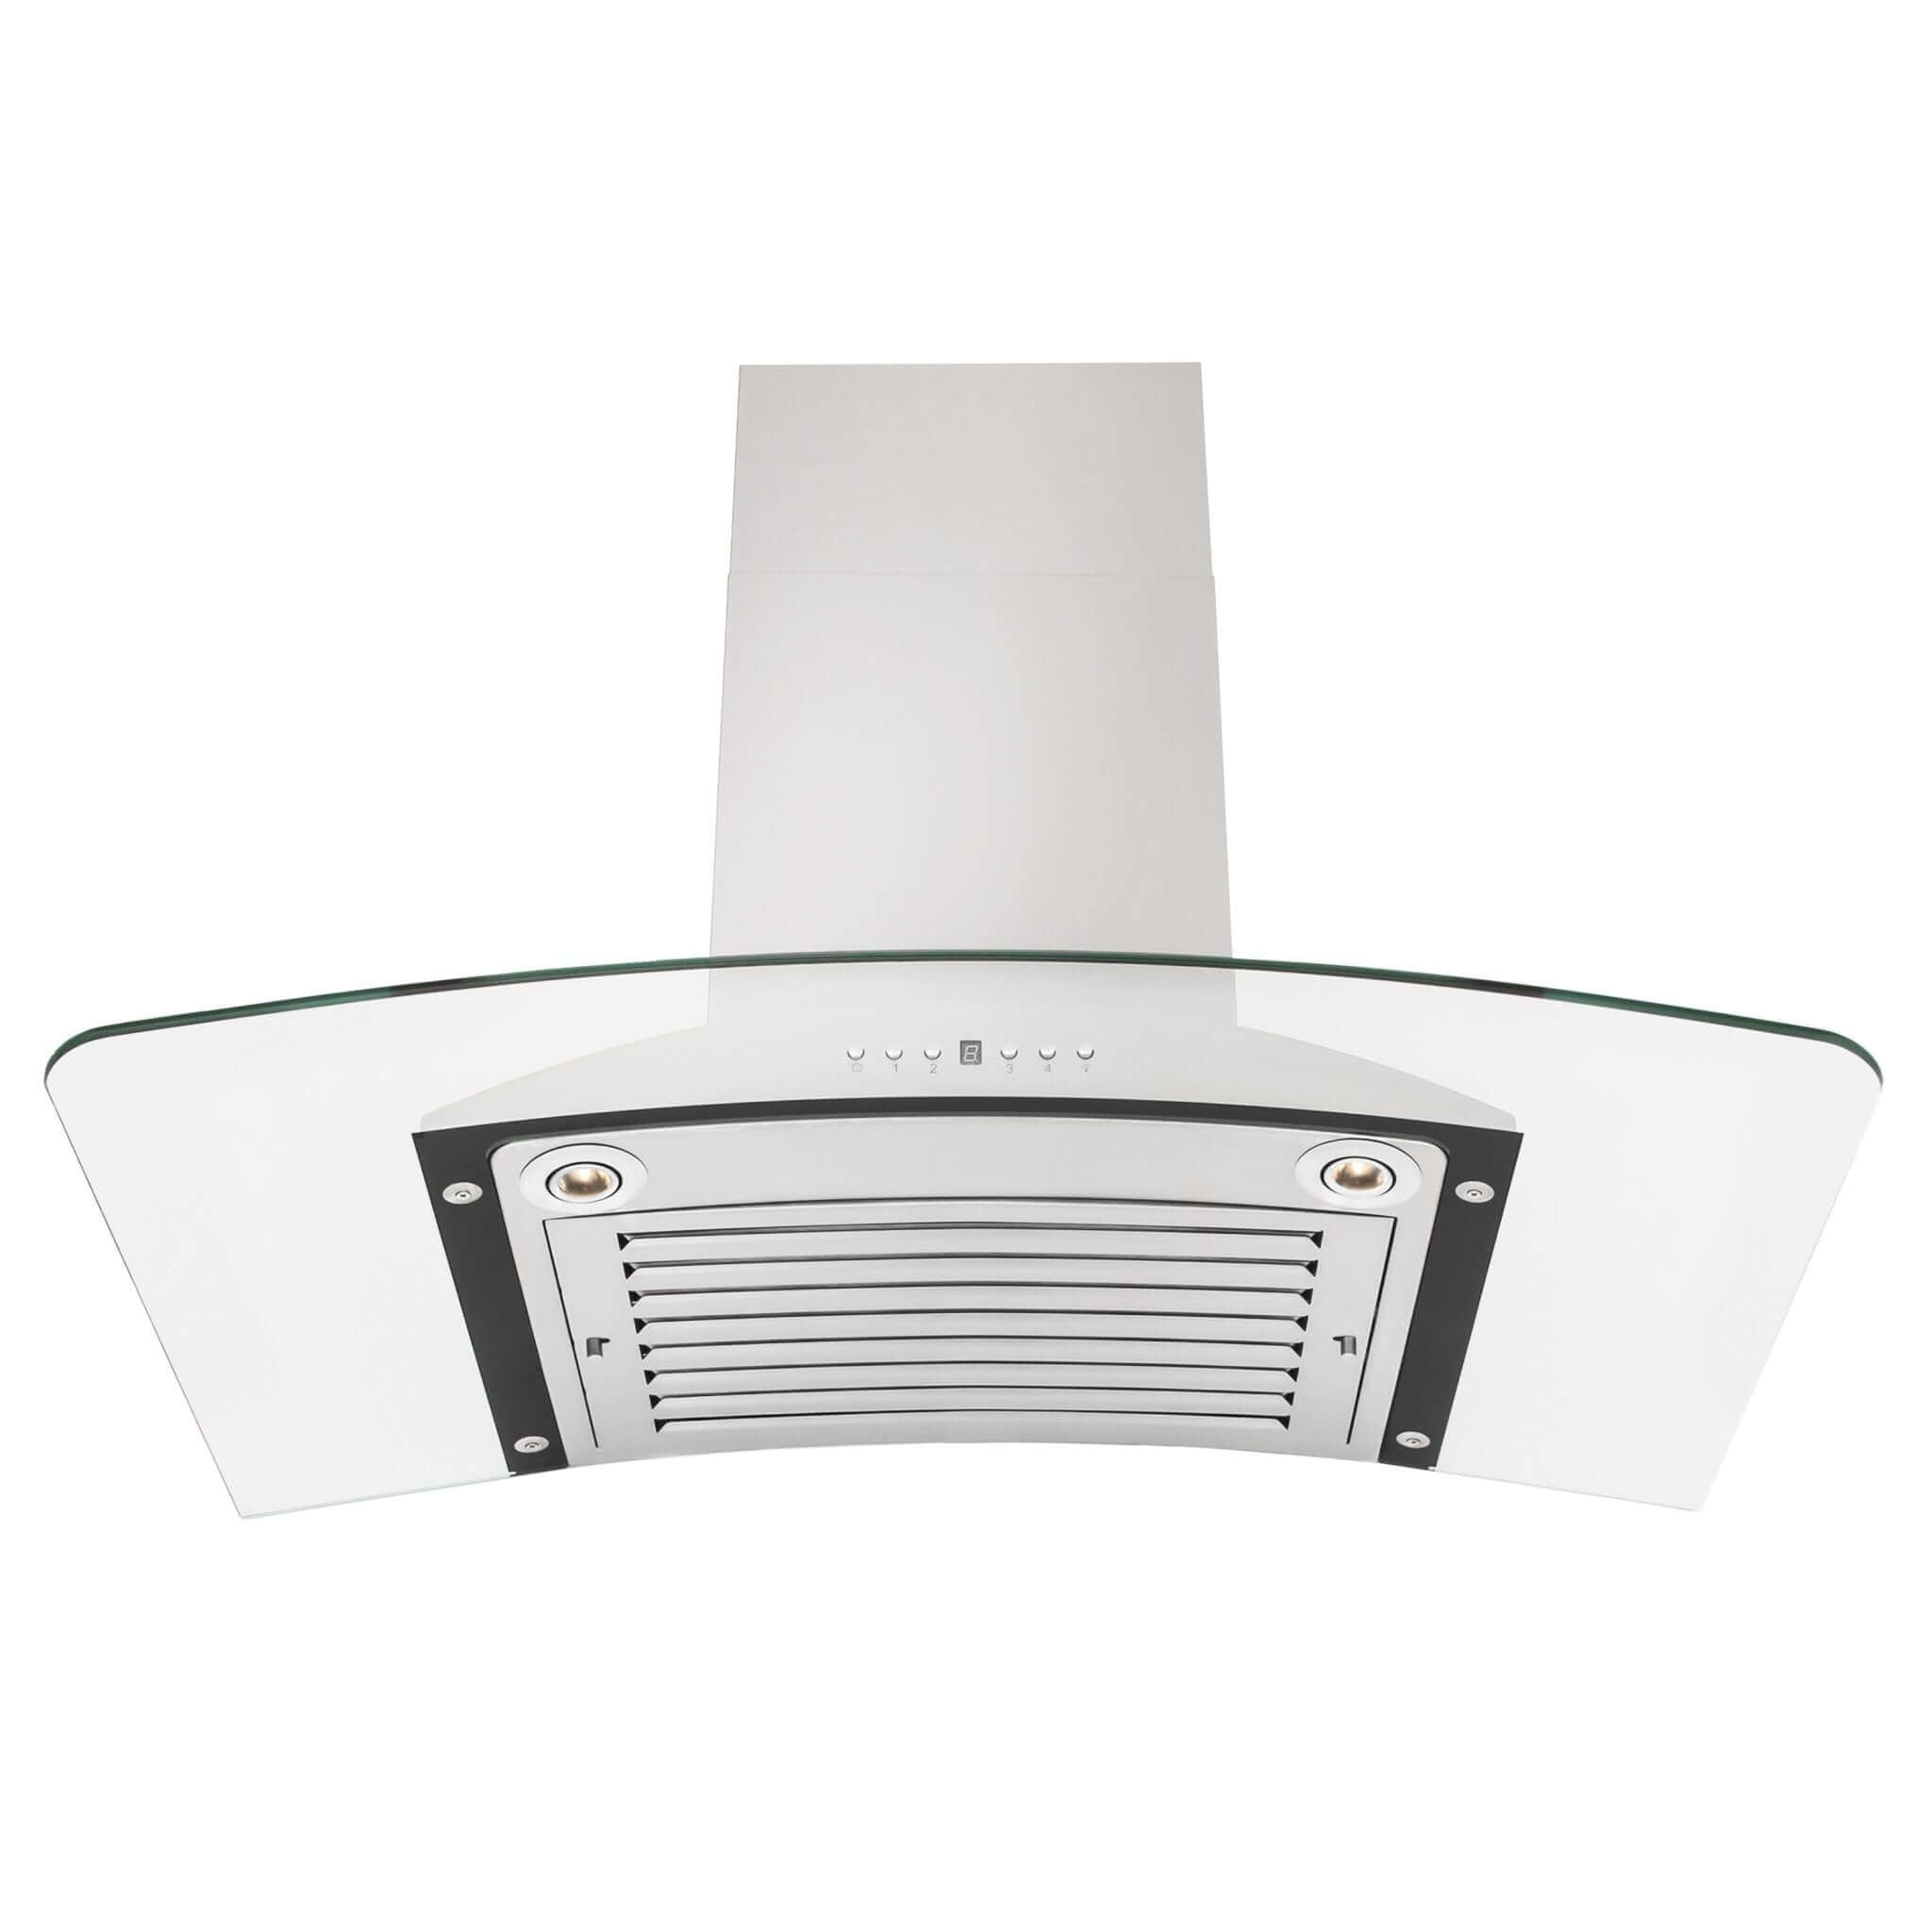 ZLINE 36" Convertible Vent Wall Mount Range Hood in Stainless Steel & Glass (KN-36)